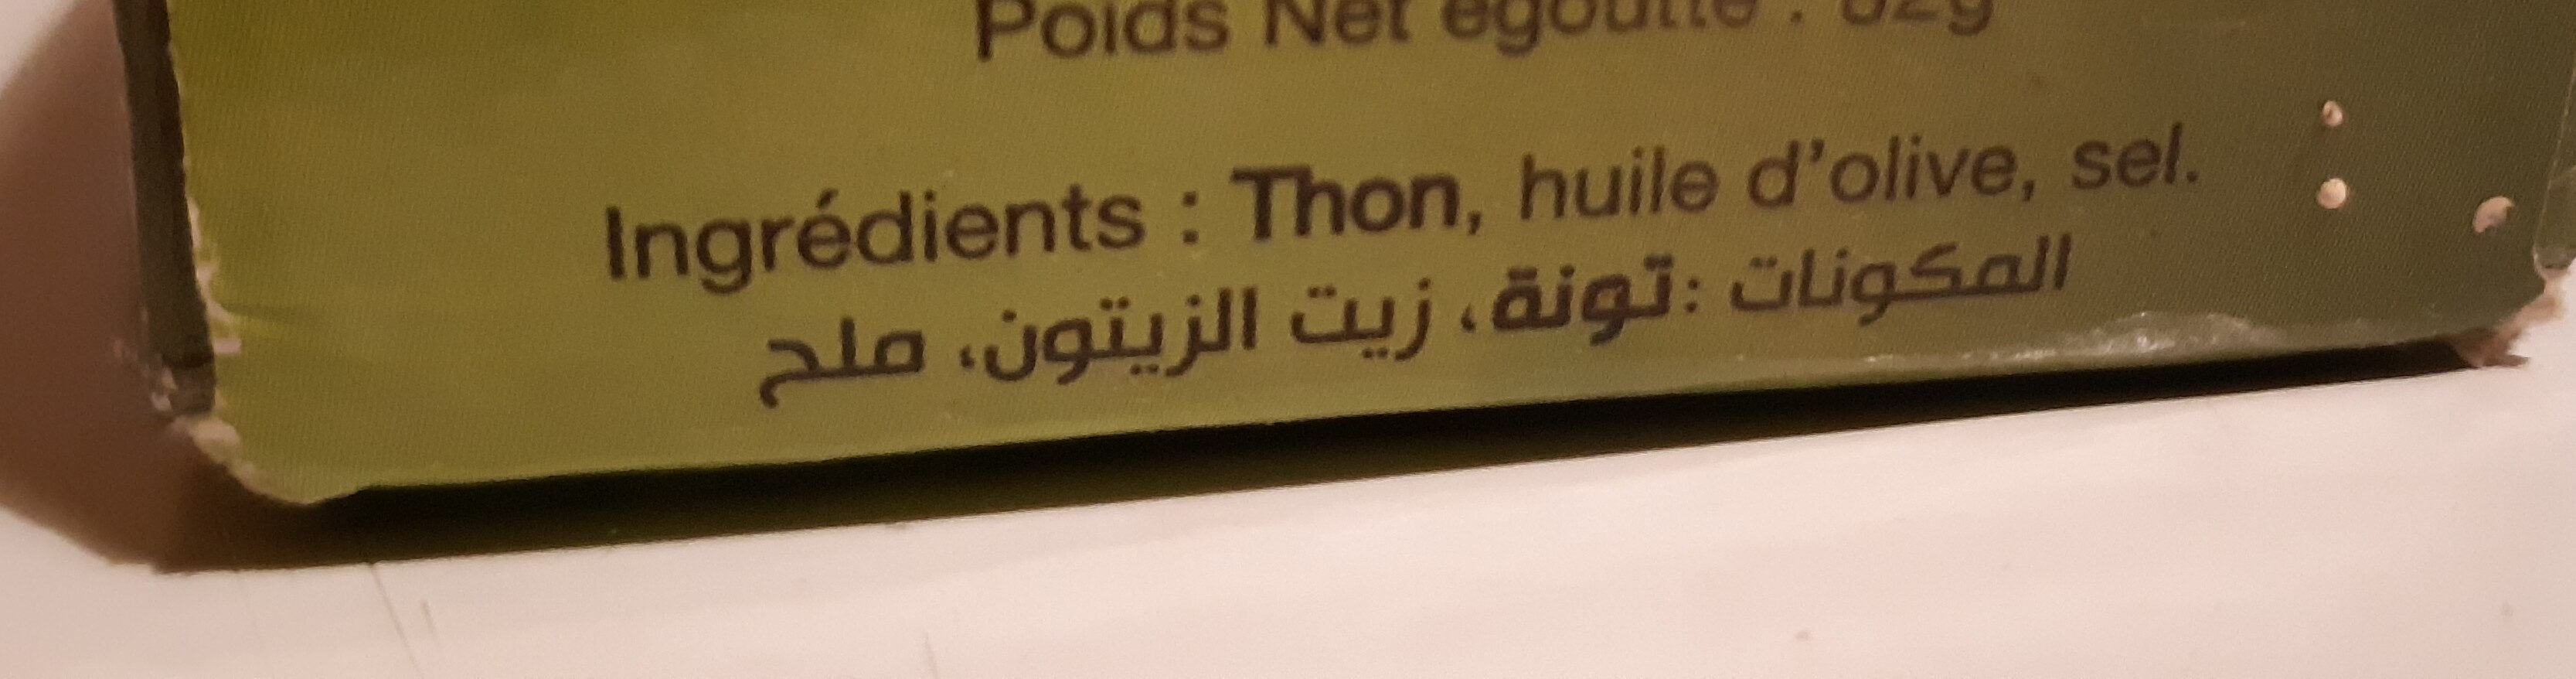 thon entier a huile d'olive - مكونات - fr